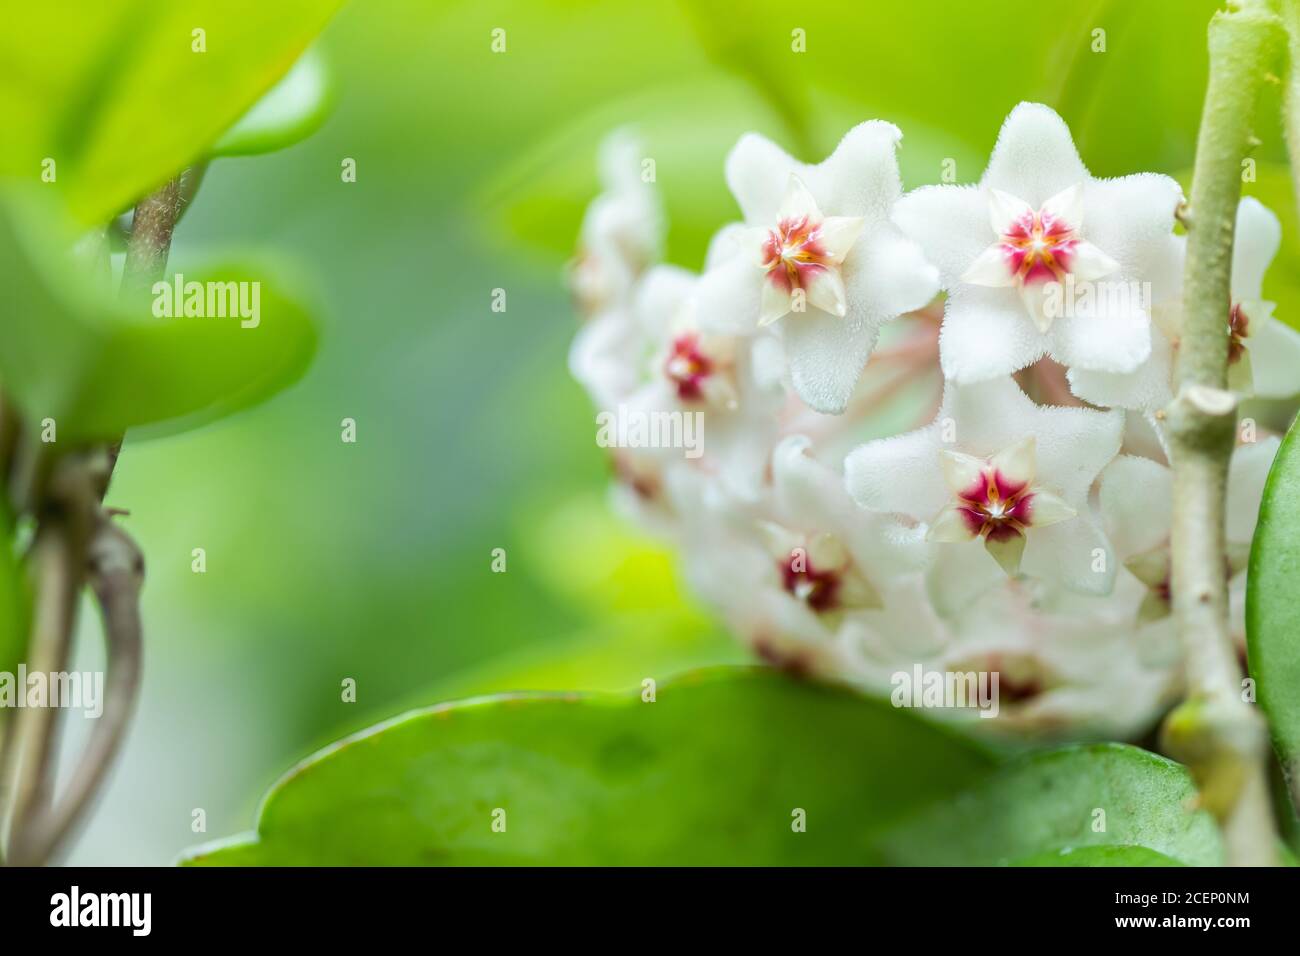 Close up of star shaped white and pink flowers of Hoya carnosa or porcelain flower or wax plant. Stock Photo